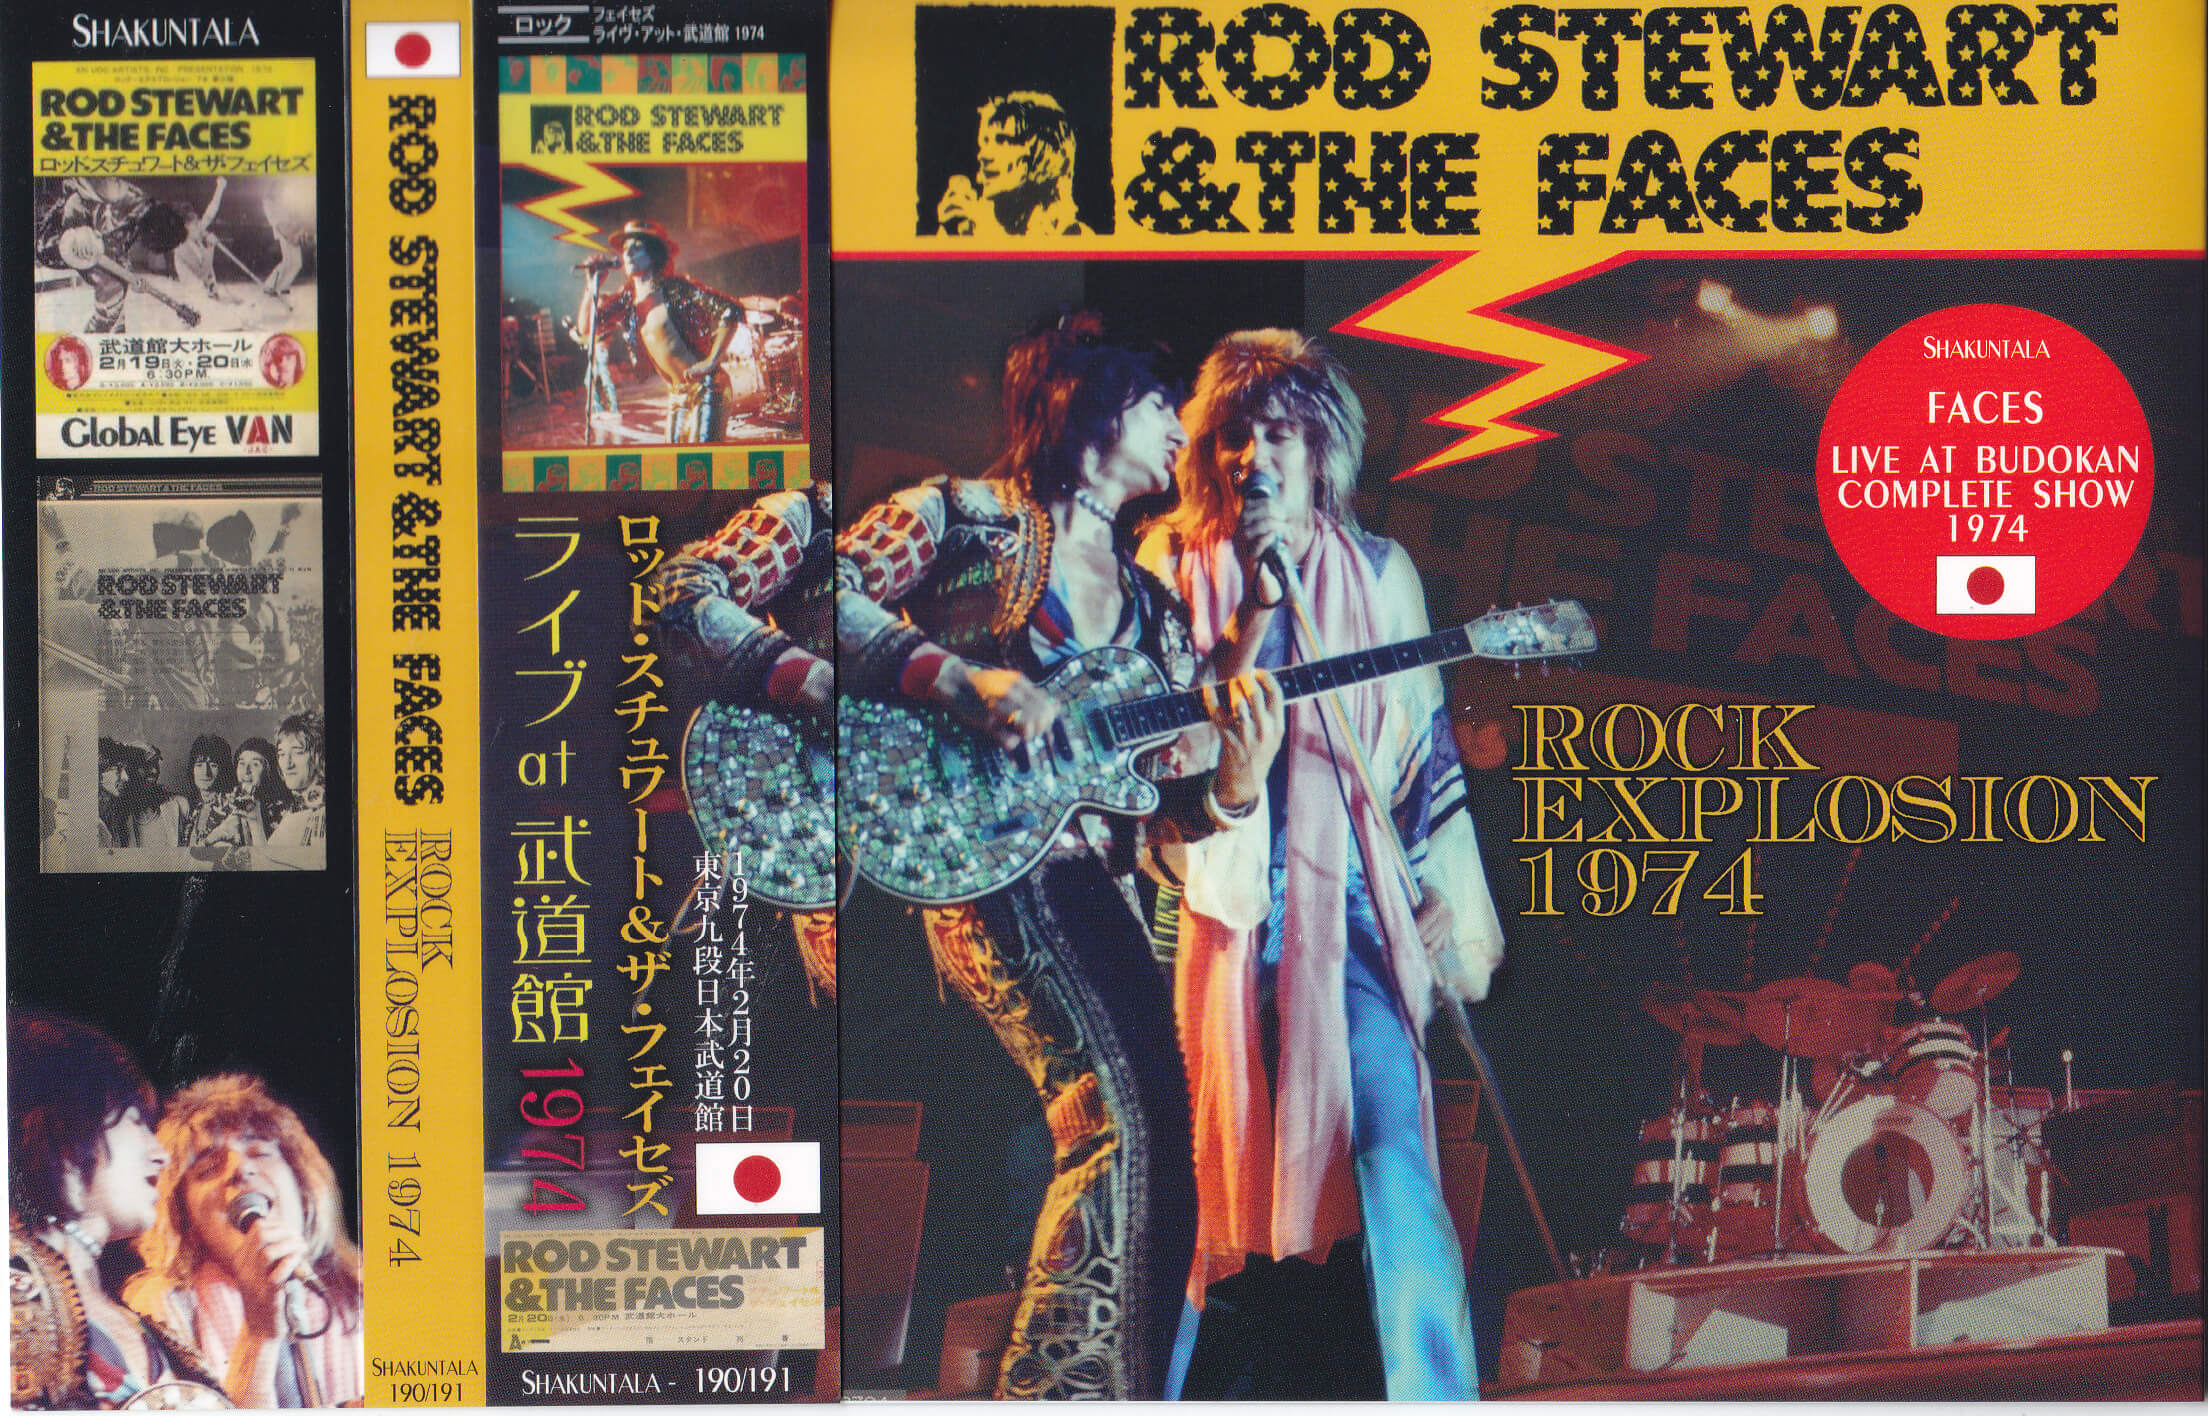 Rod Stewart & The Faces / Rock Explosion 1974 / 2CD With OBI Strip